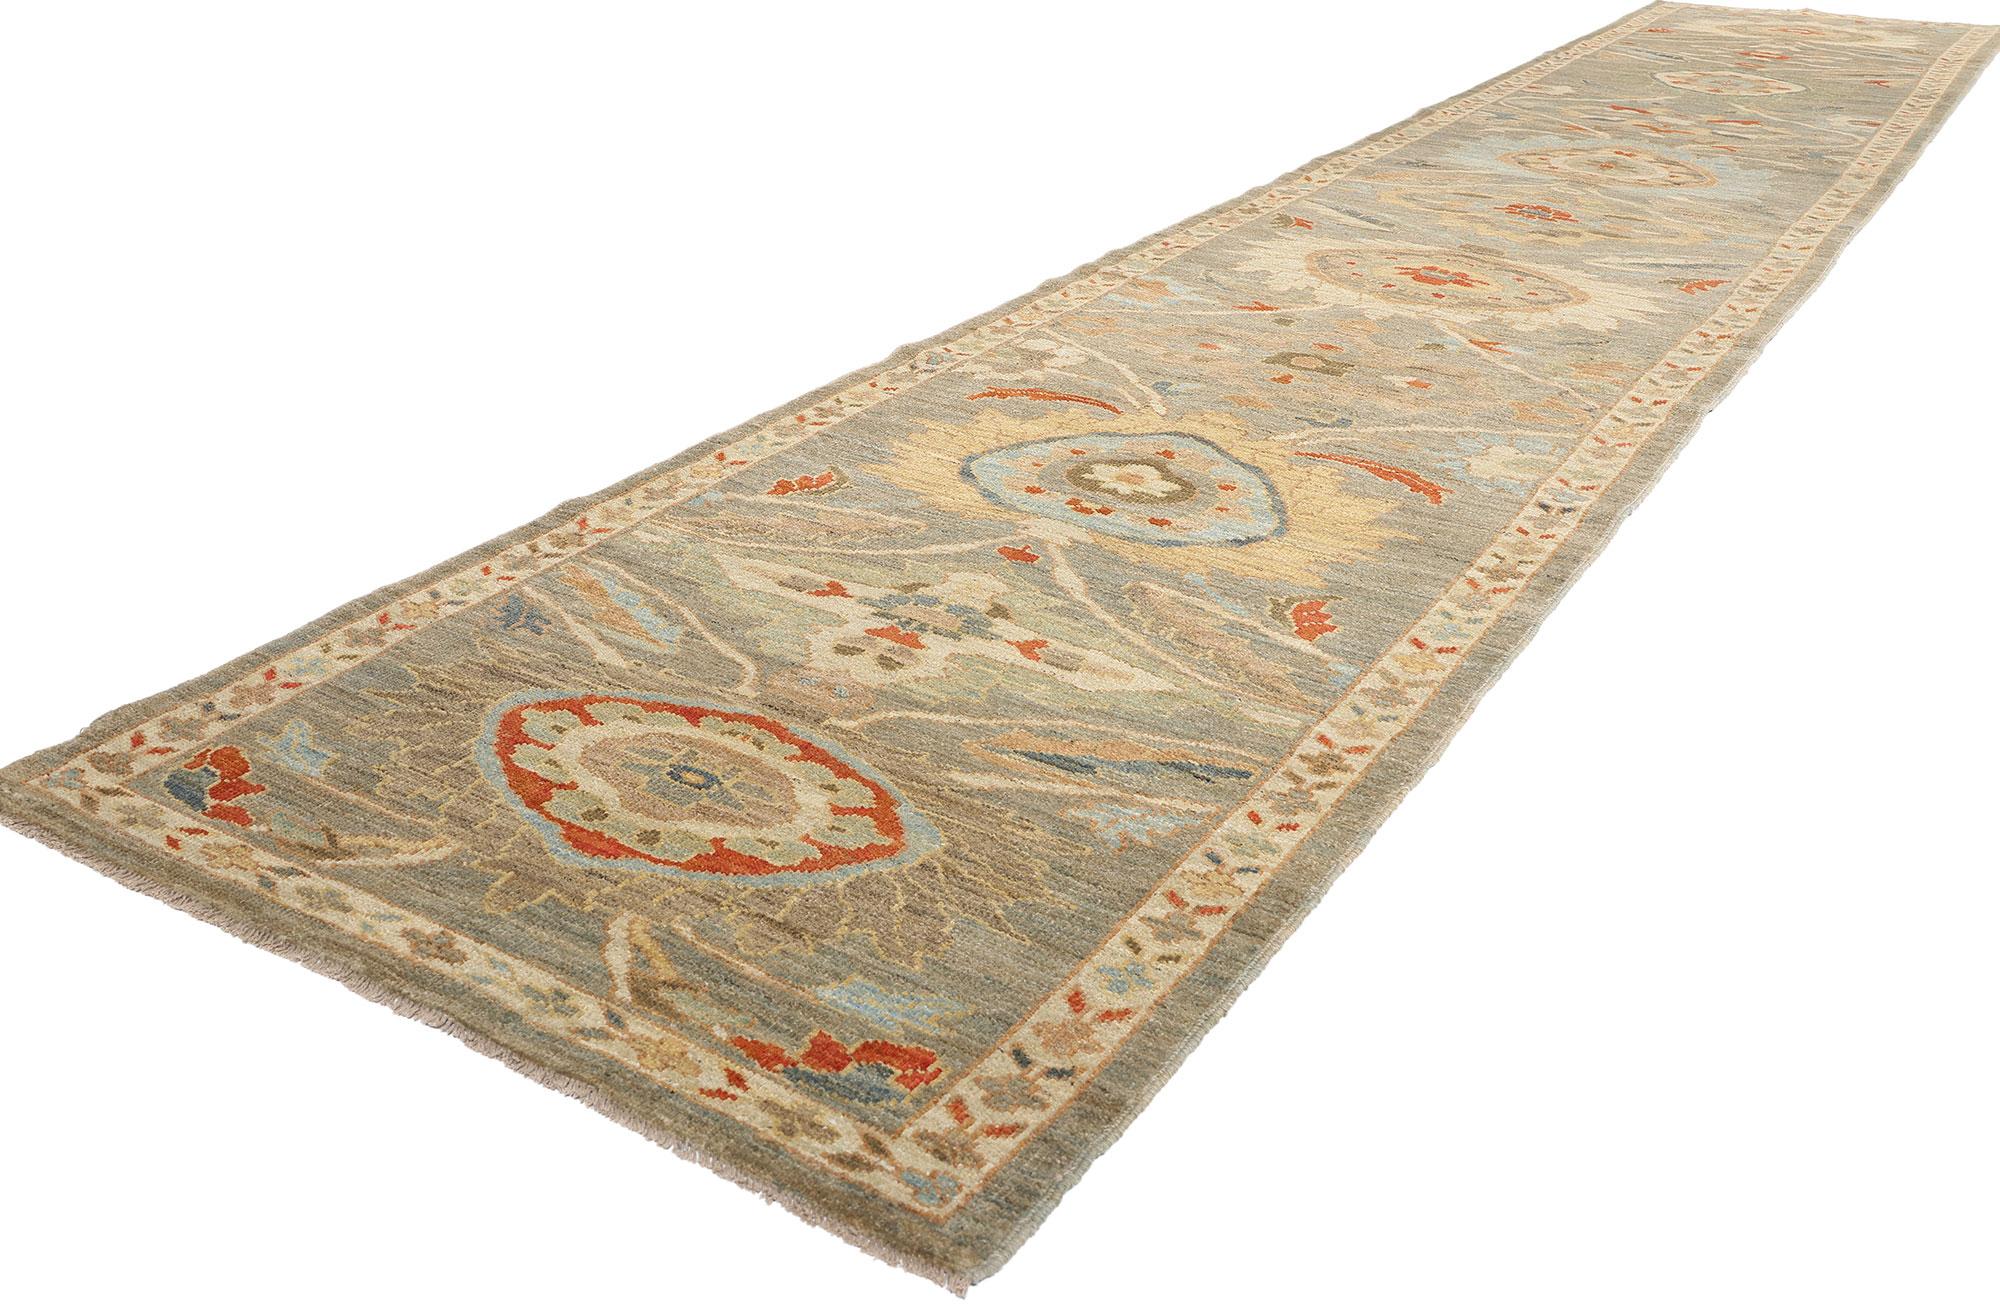 61289 Modern Persian Sultanabad Rug Runner, 03'05 x 18'11. Persian Sultanabad carpet runners are narrow, elongated rugs specifically designed for use in hallways, corridors, or narrow spaces. They originate from the Sultanabad region in Iran